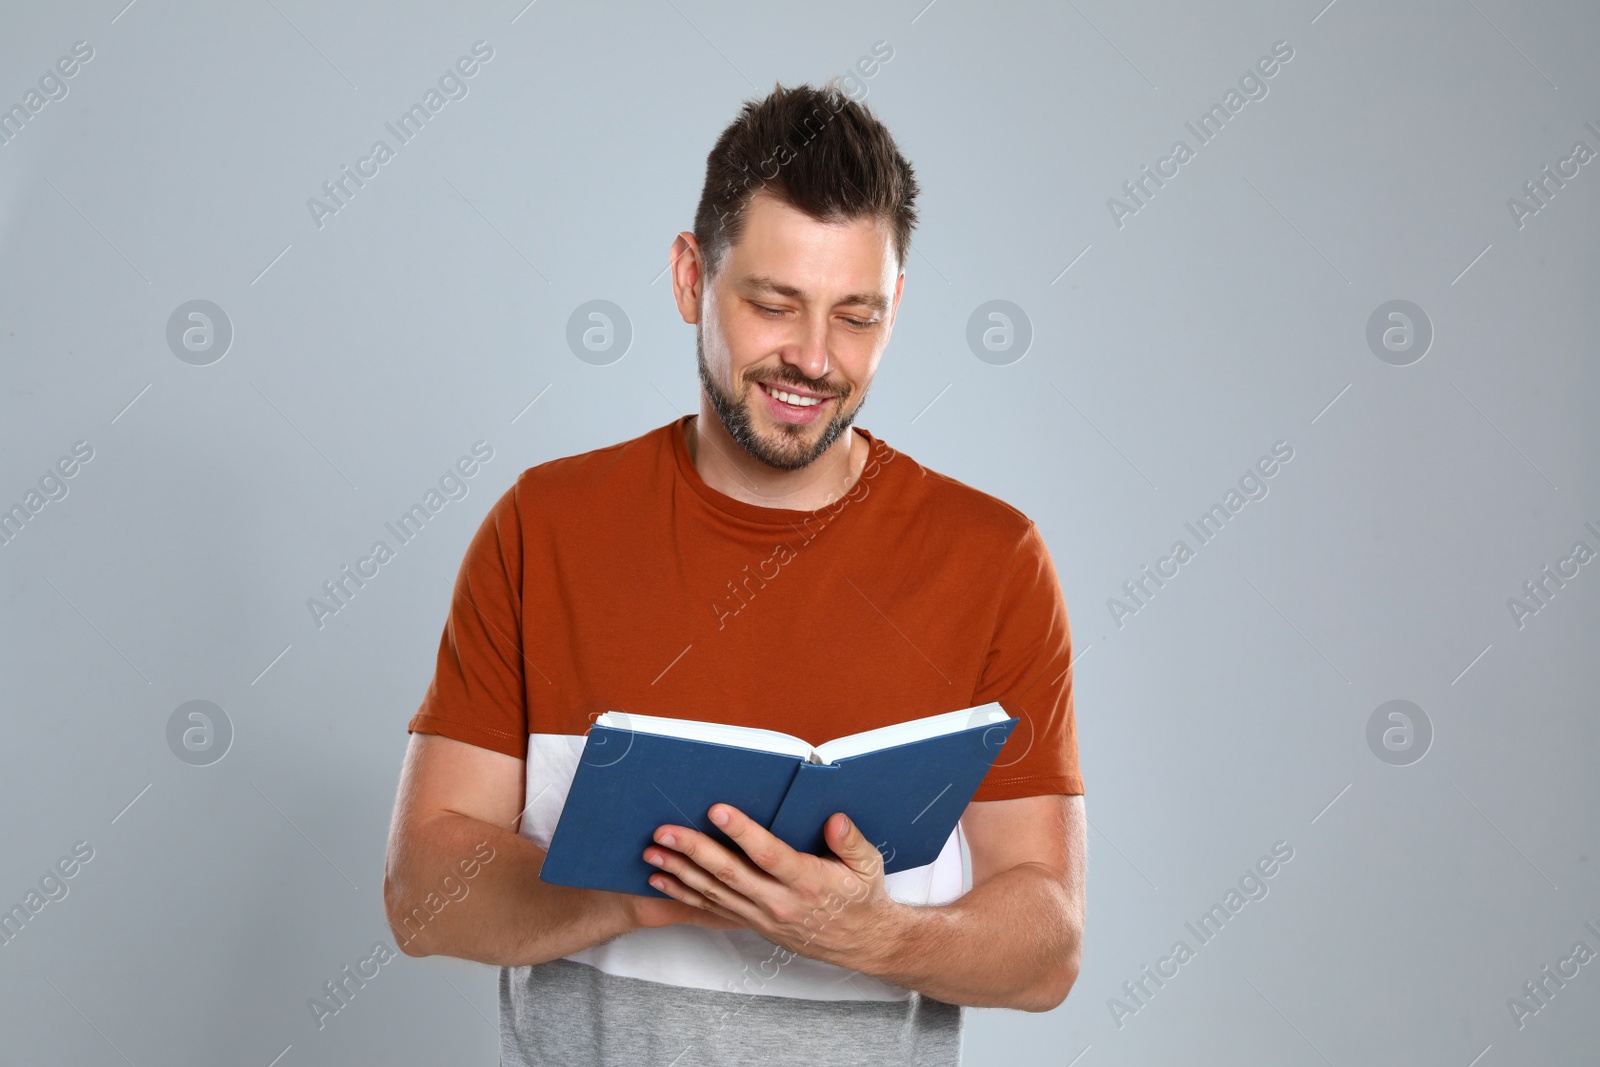 Photo of Handsome man reading book on light background